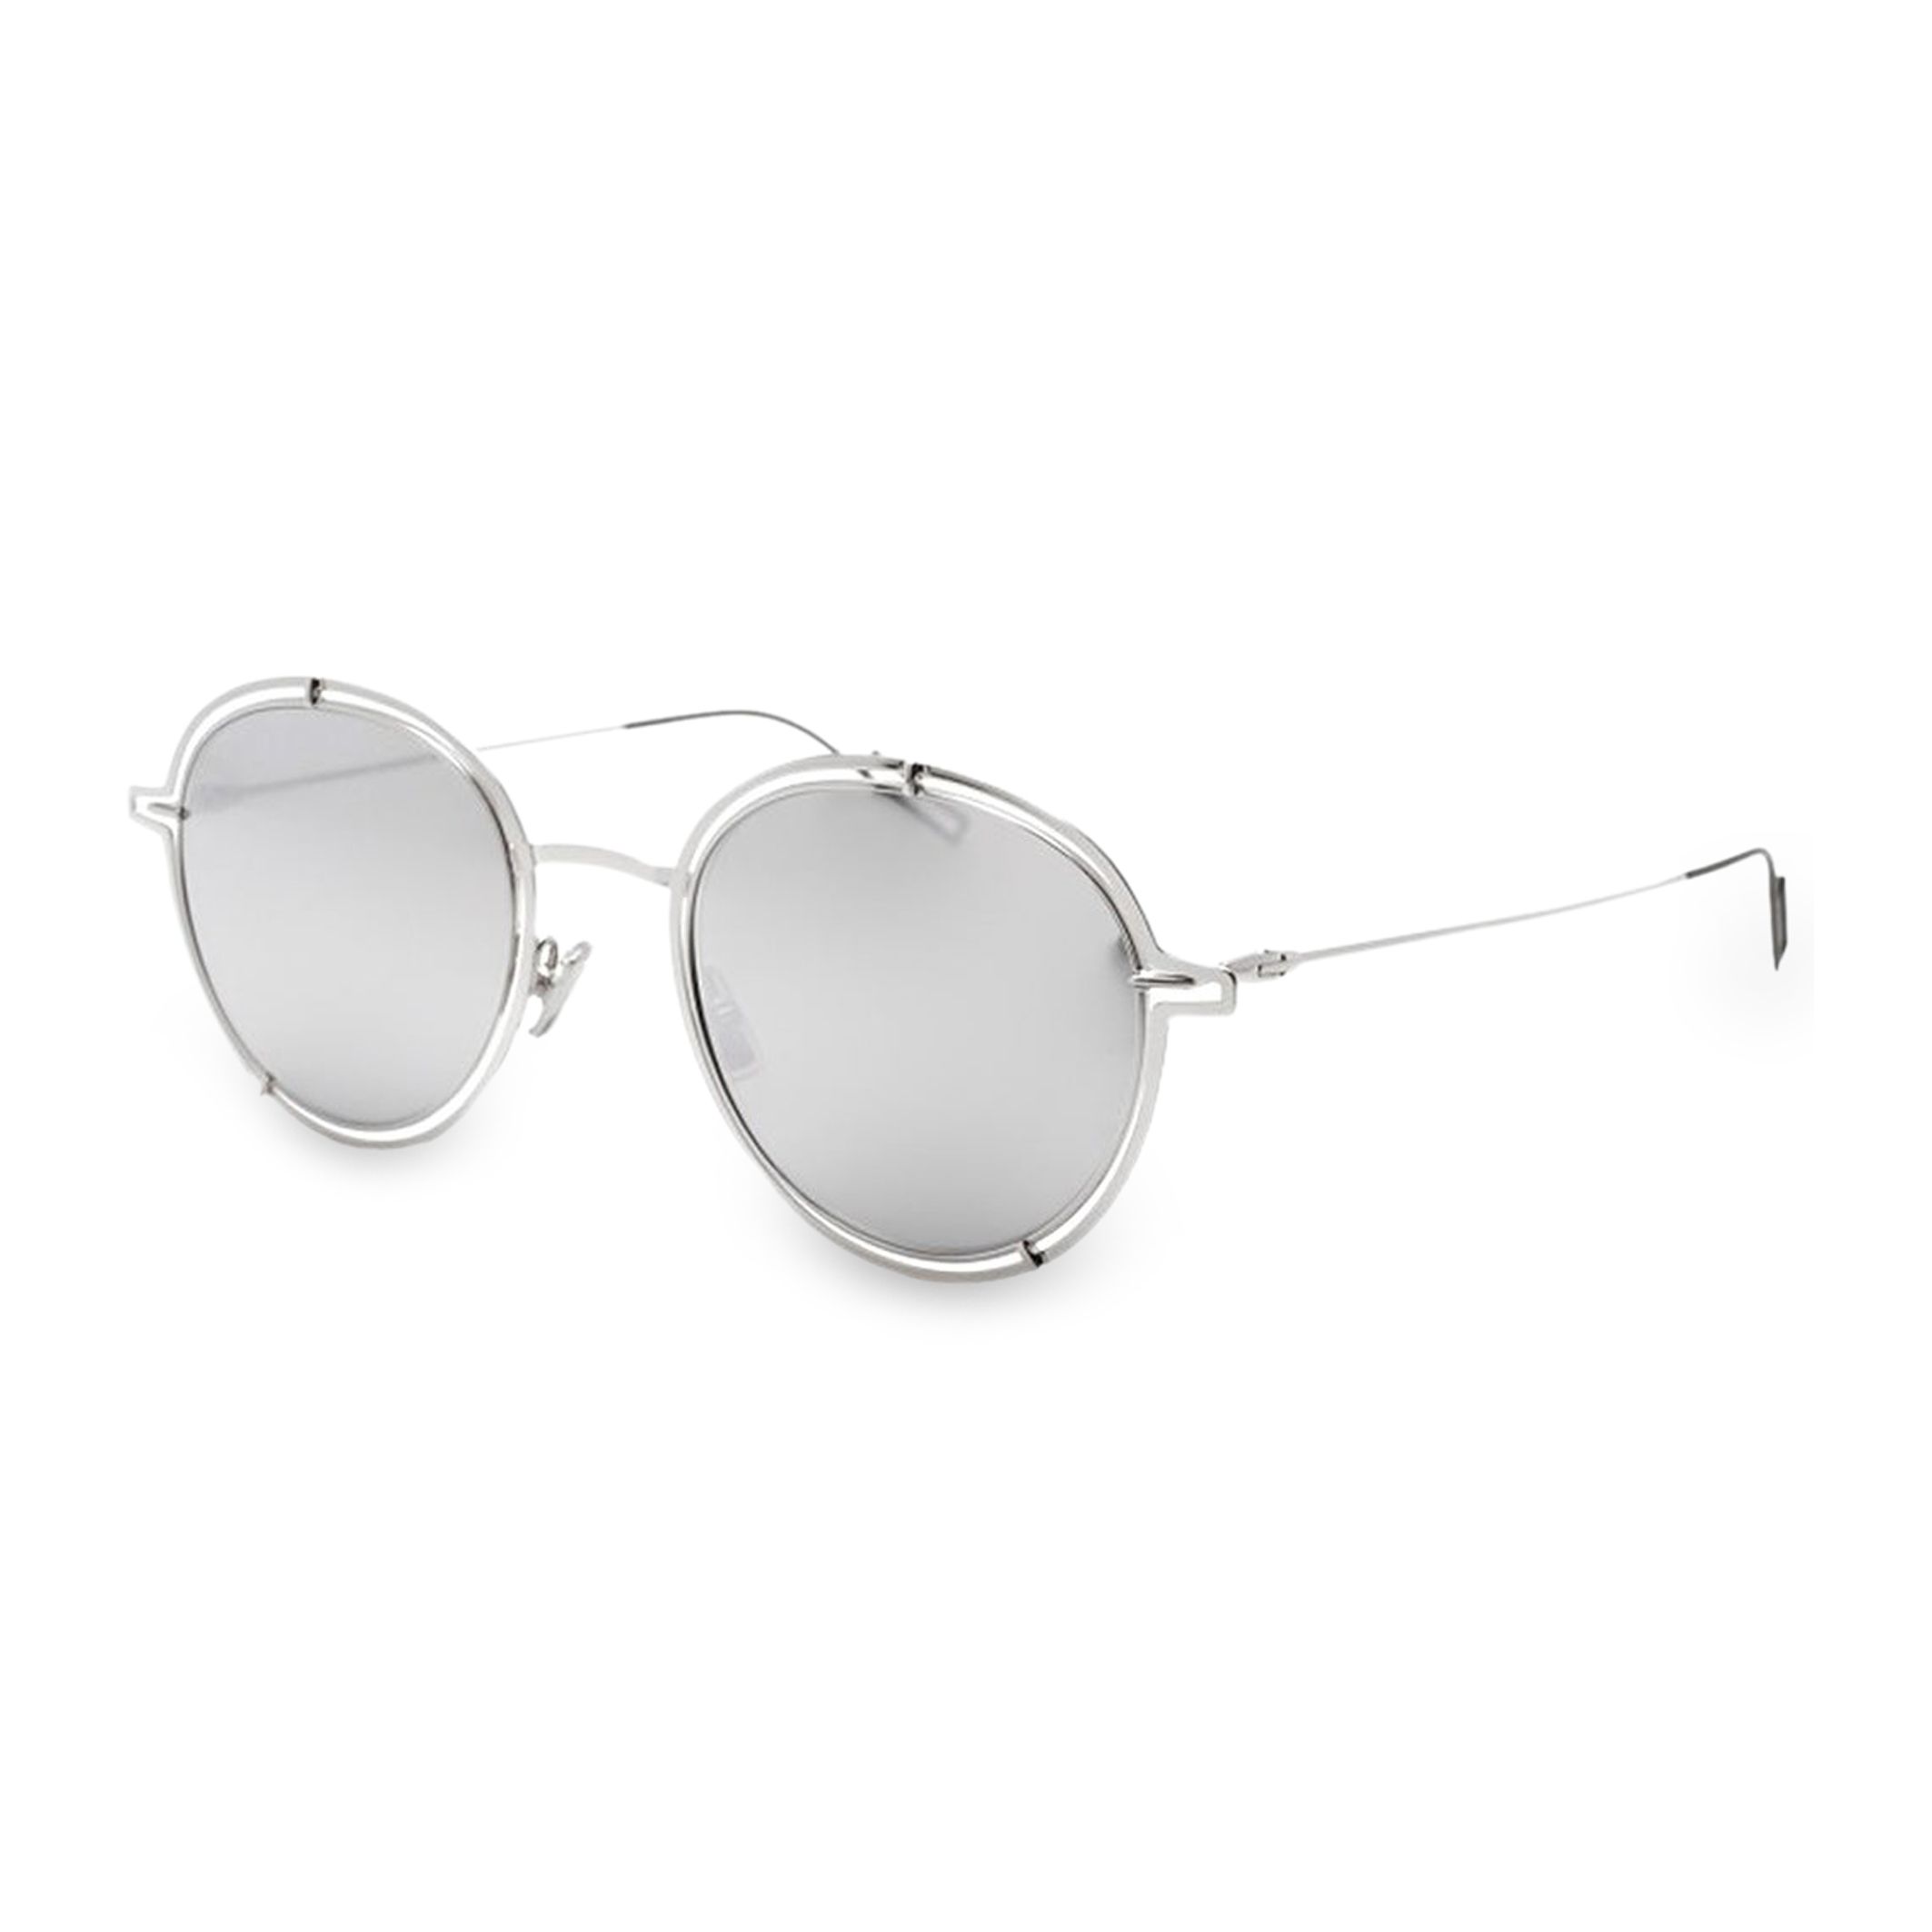 Made in: Italy <br> Gender: Woman <br> Lenses: mirrored <br> Frame: metal <br> Bridge, mm: 22 <br> Temples, mm: 150 <br> Lenses diameter, mm: 49 <br> protection: UV3 <br> Logo: yes <br> Original packaging: yes